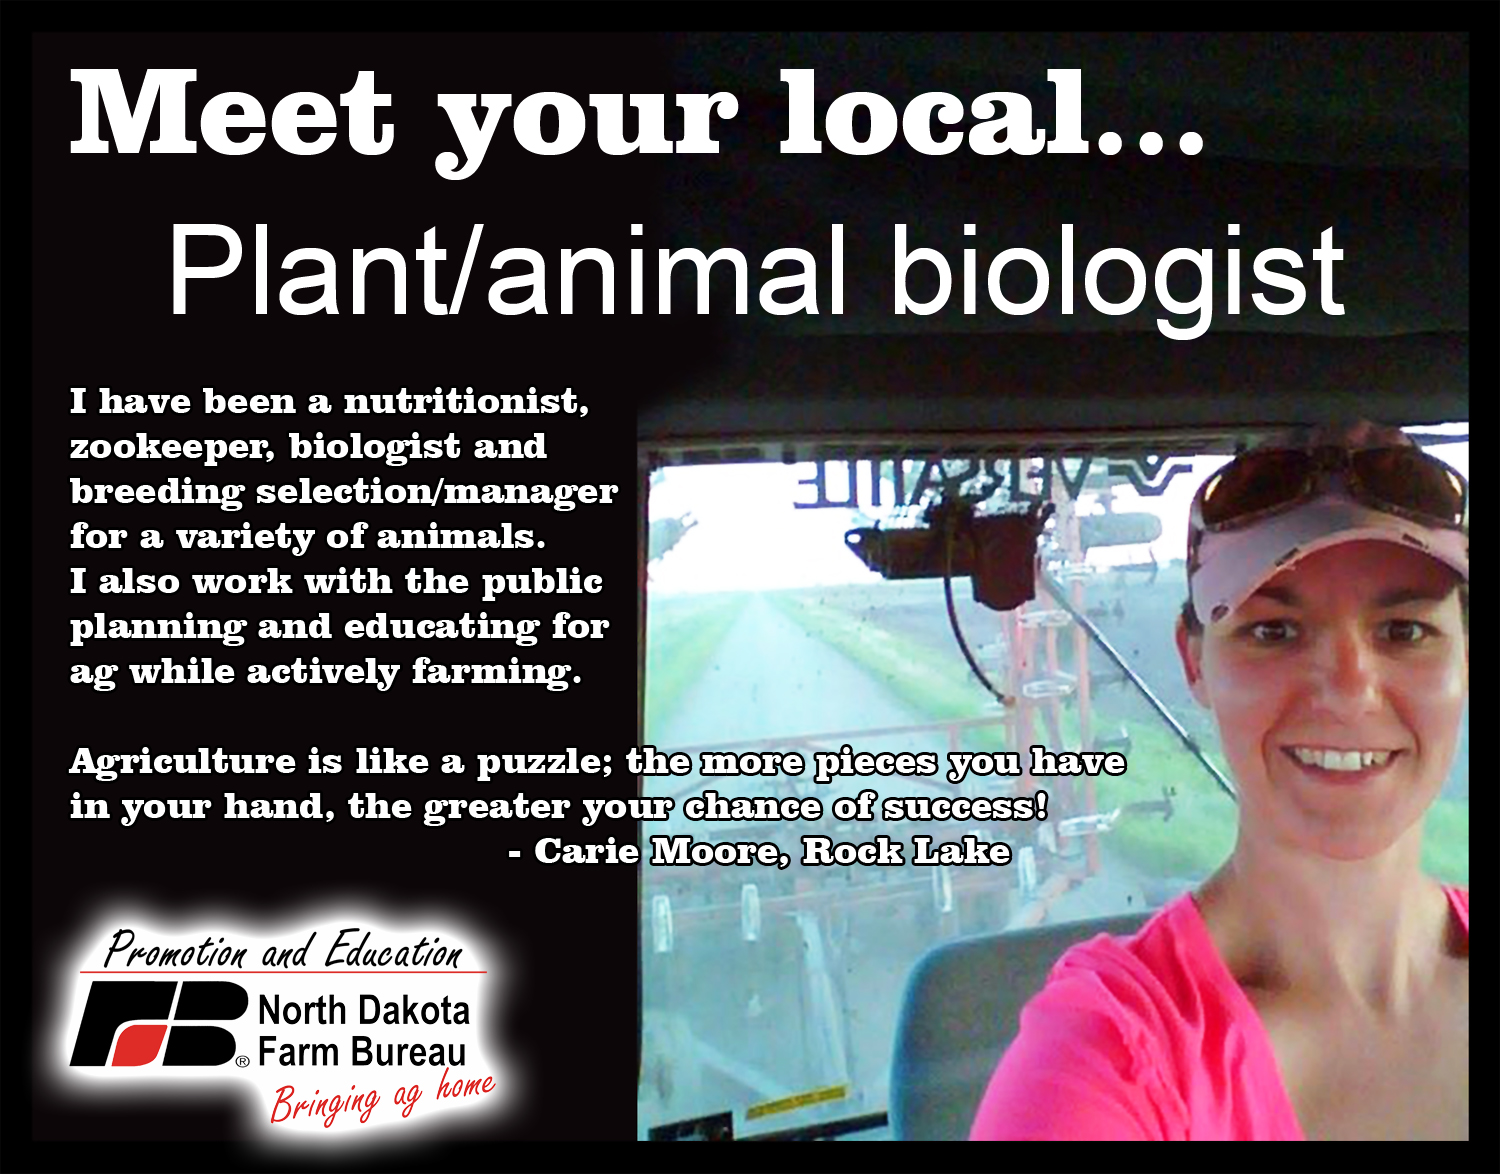 Meet your local plant and animal biologist